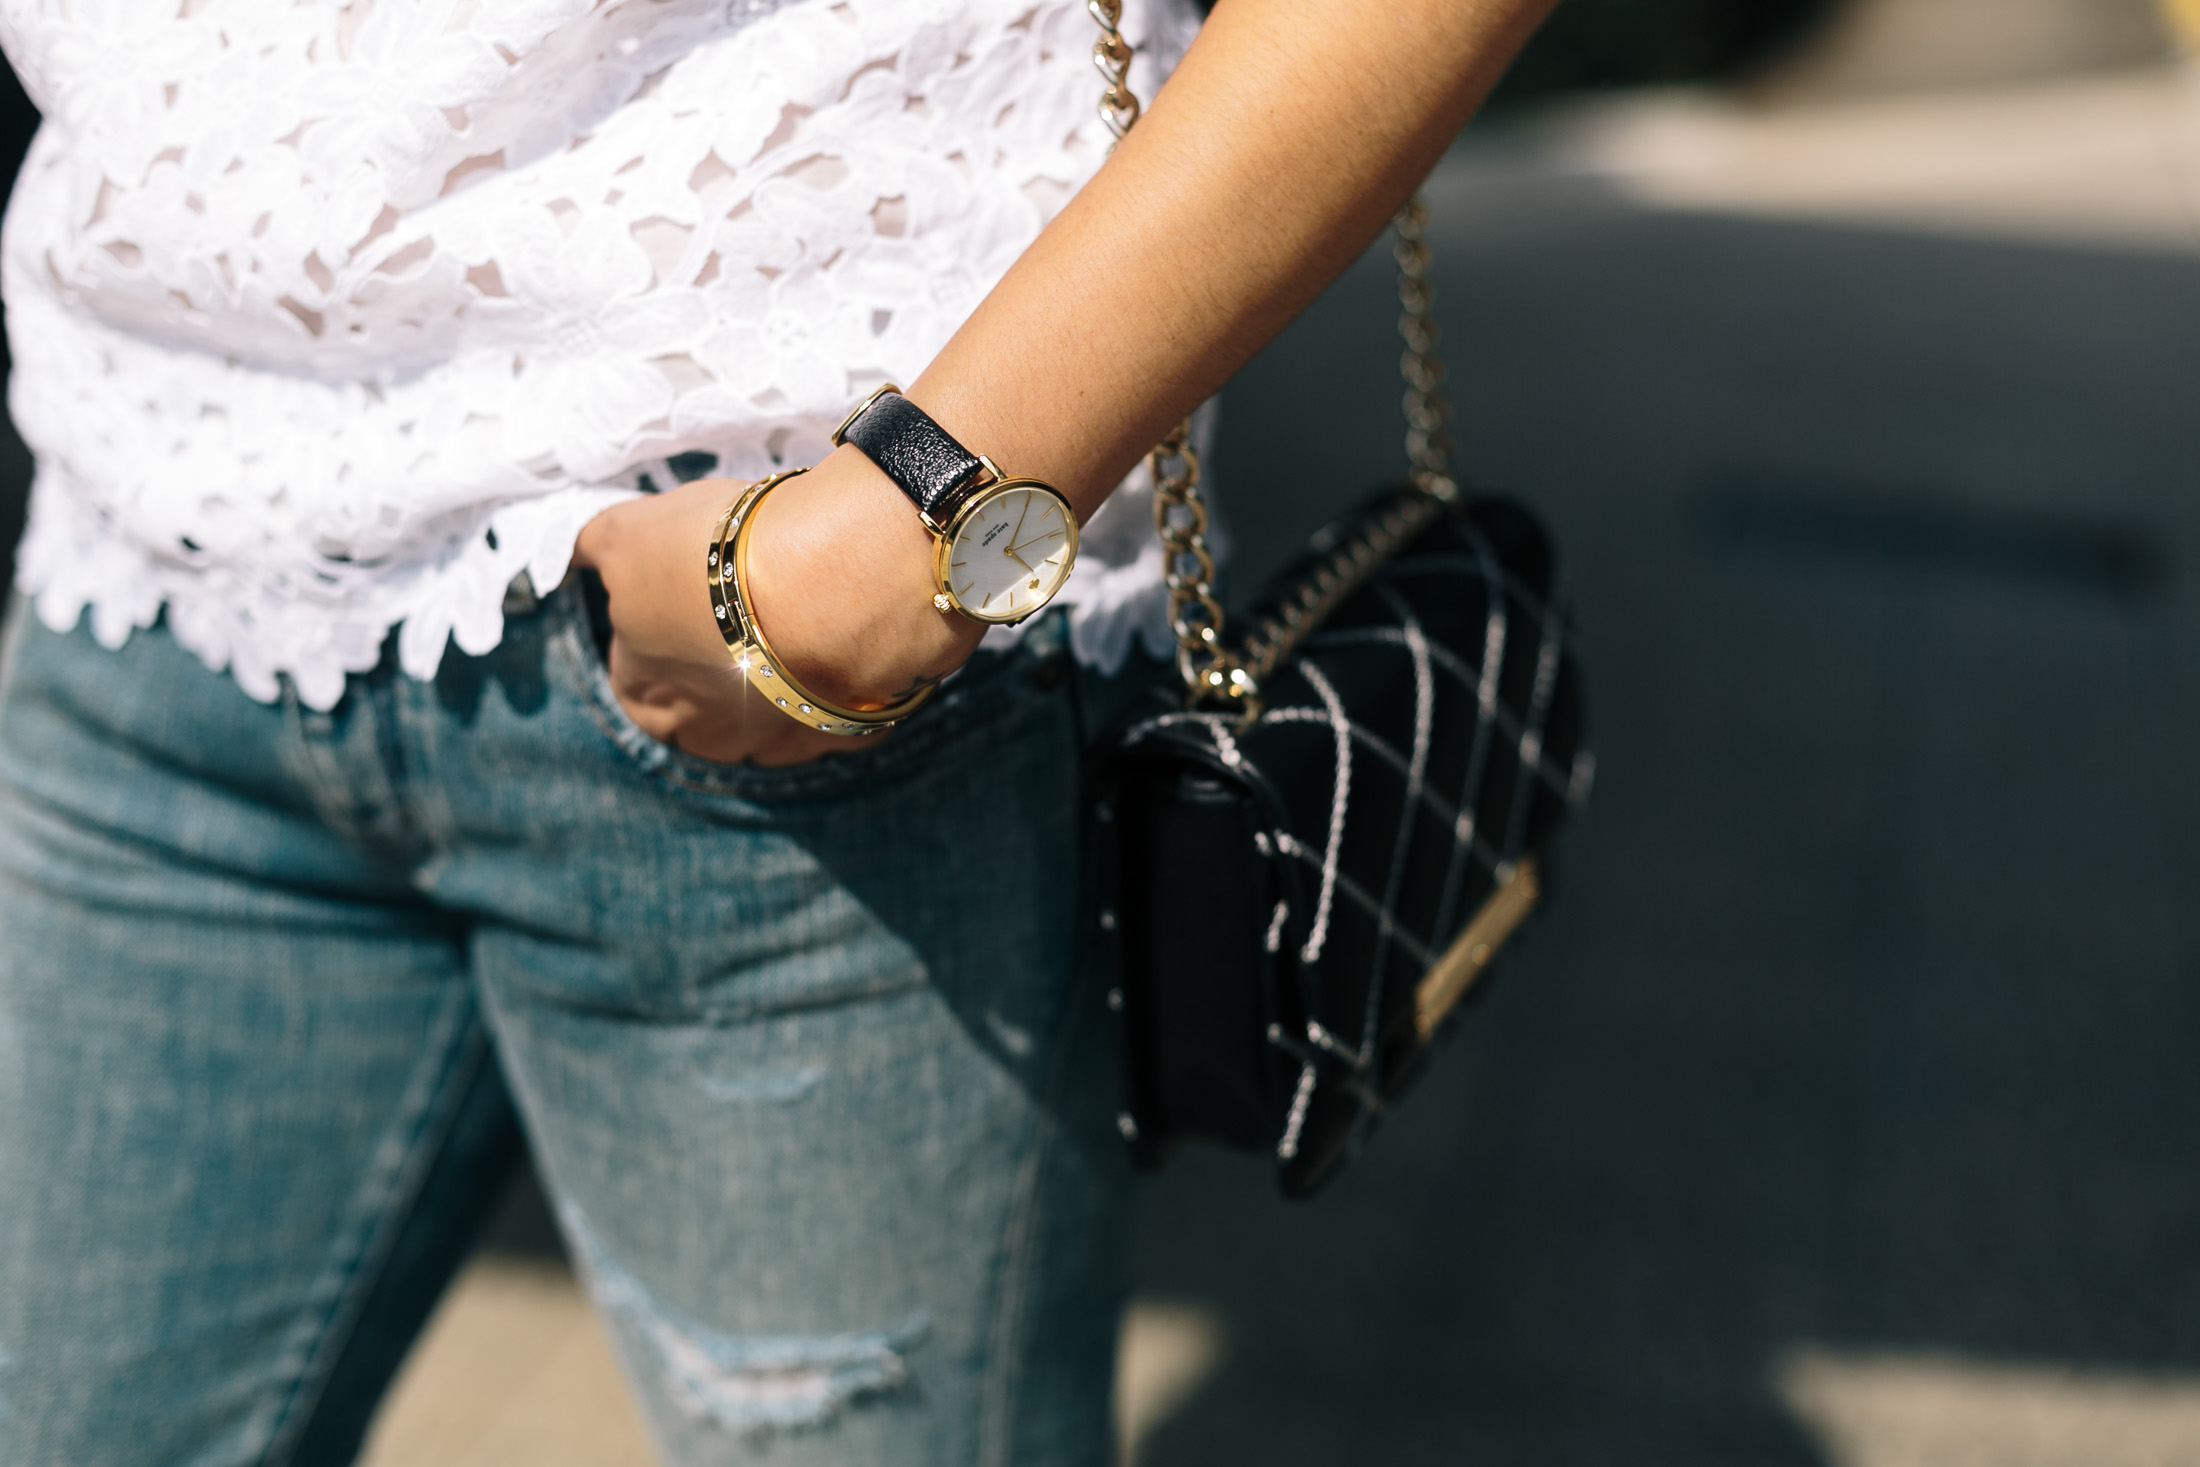 Outfit details: Kate Spade white lace top, Kate Spade minimalism watch, Cartier style bangles from Kate Spade, black and white quilted shoulder bag from Kate Spade